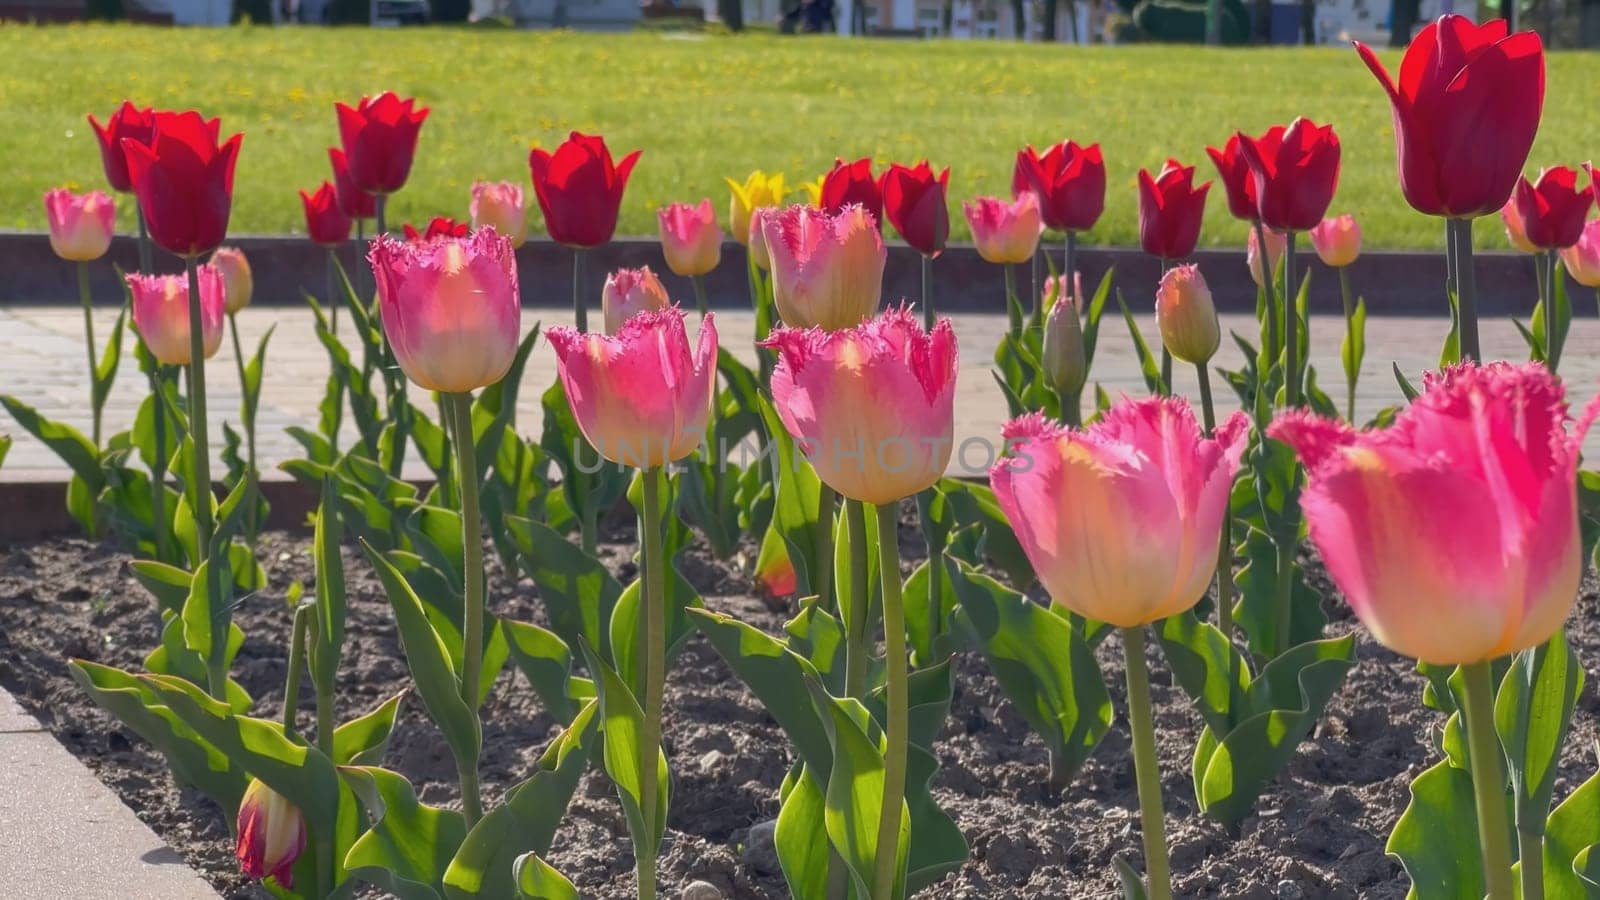 Spring tulips in the city in a flowerbed. by DovidPro